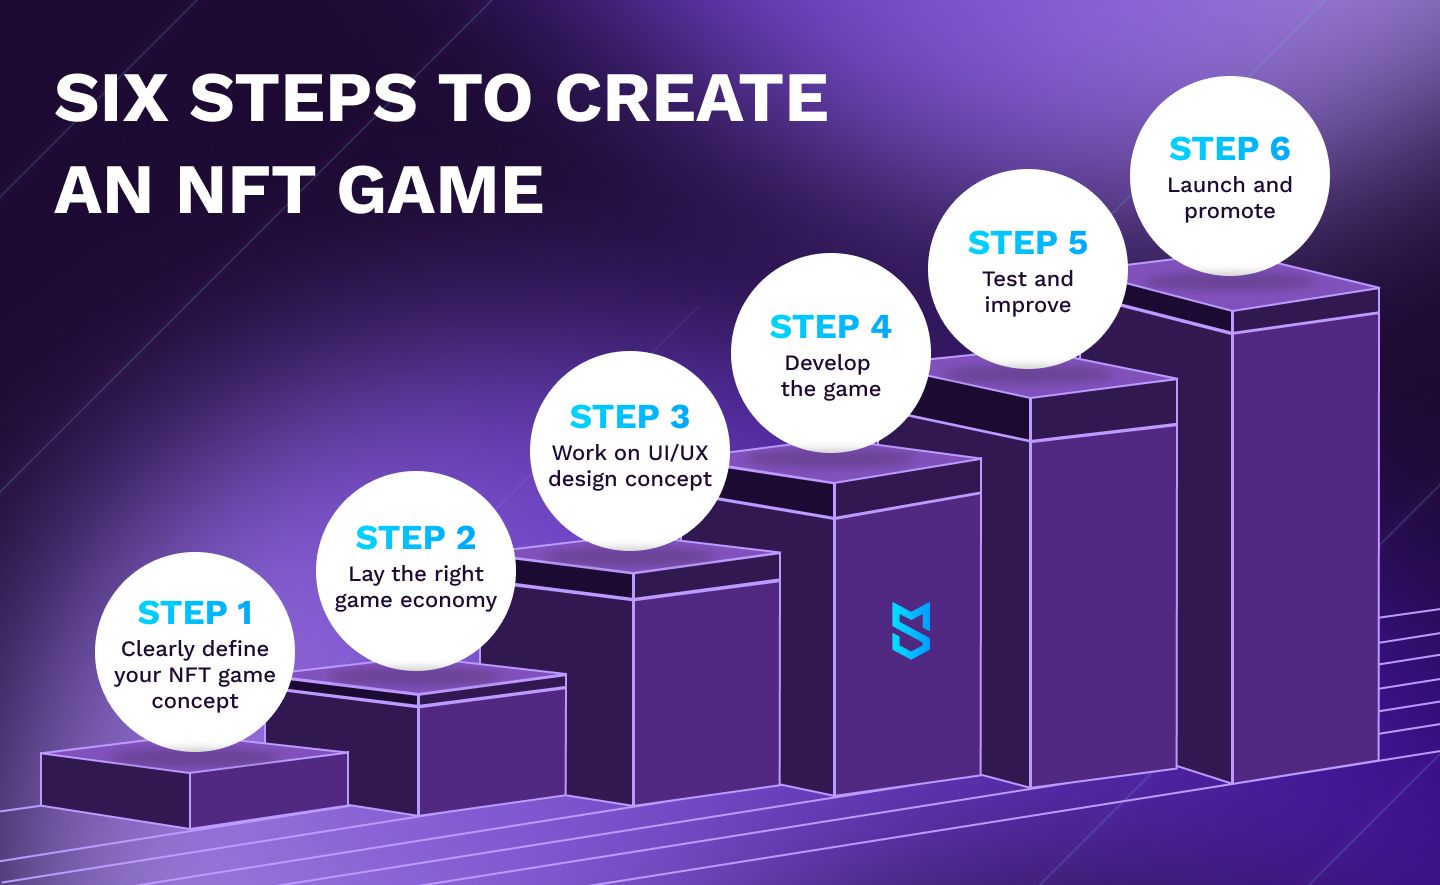 How to create an NFT game step-by-step?